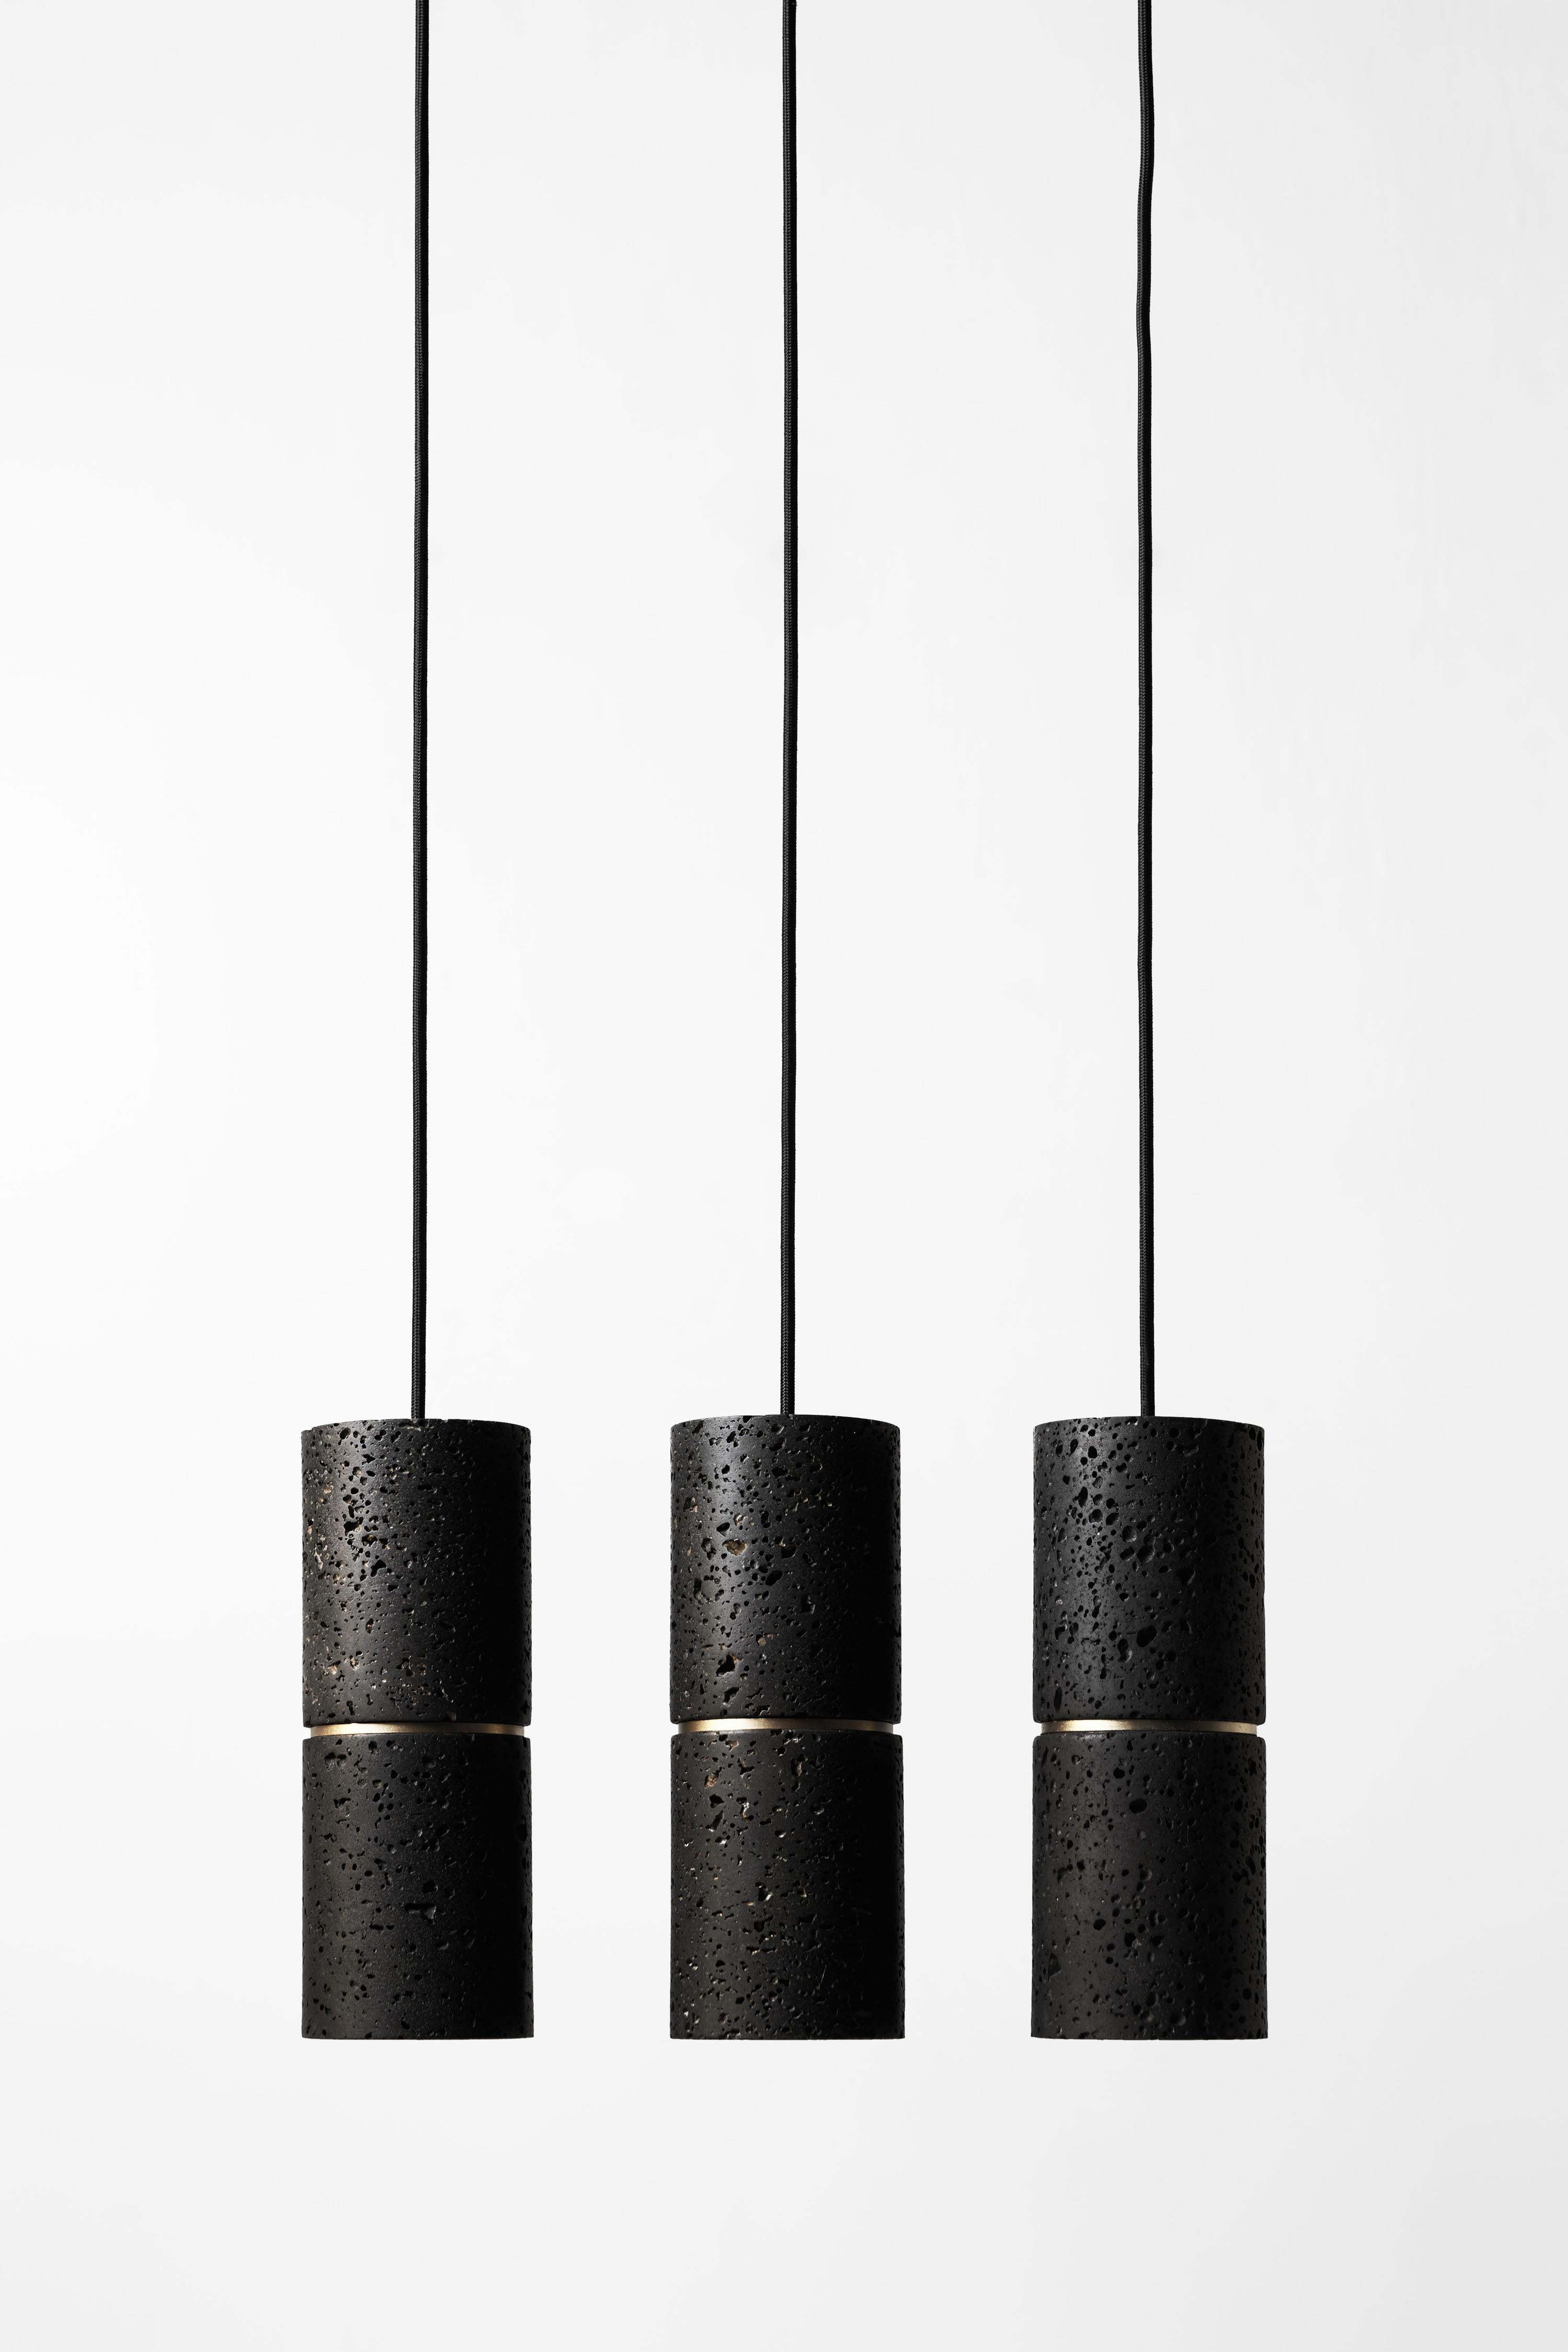 Pendant lamp 'RI' by Buzao x Bentu Design. 
Black lava stone and white marble versions available.

(Sold individually)

Measures: 26.5 cm high; 10 cm diameter
Wire: 2 meters black (adjustable)

Brass (gold) or aluminum (black) finish.

Lamp type: